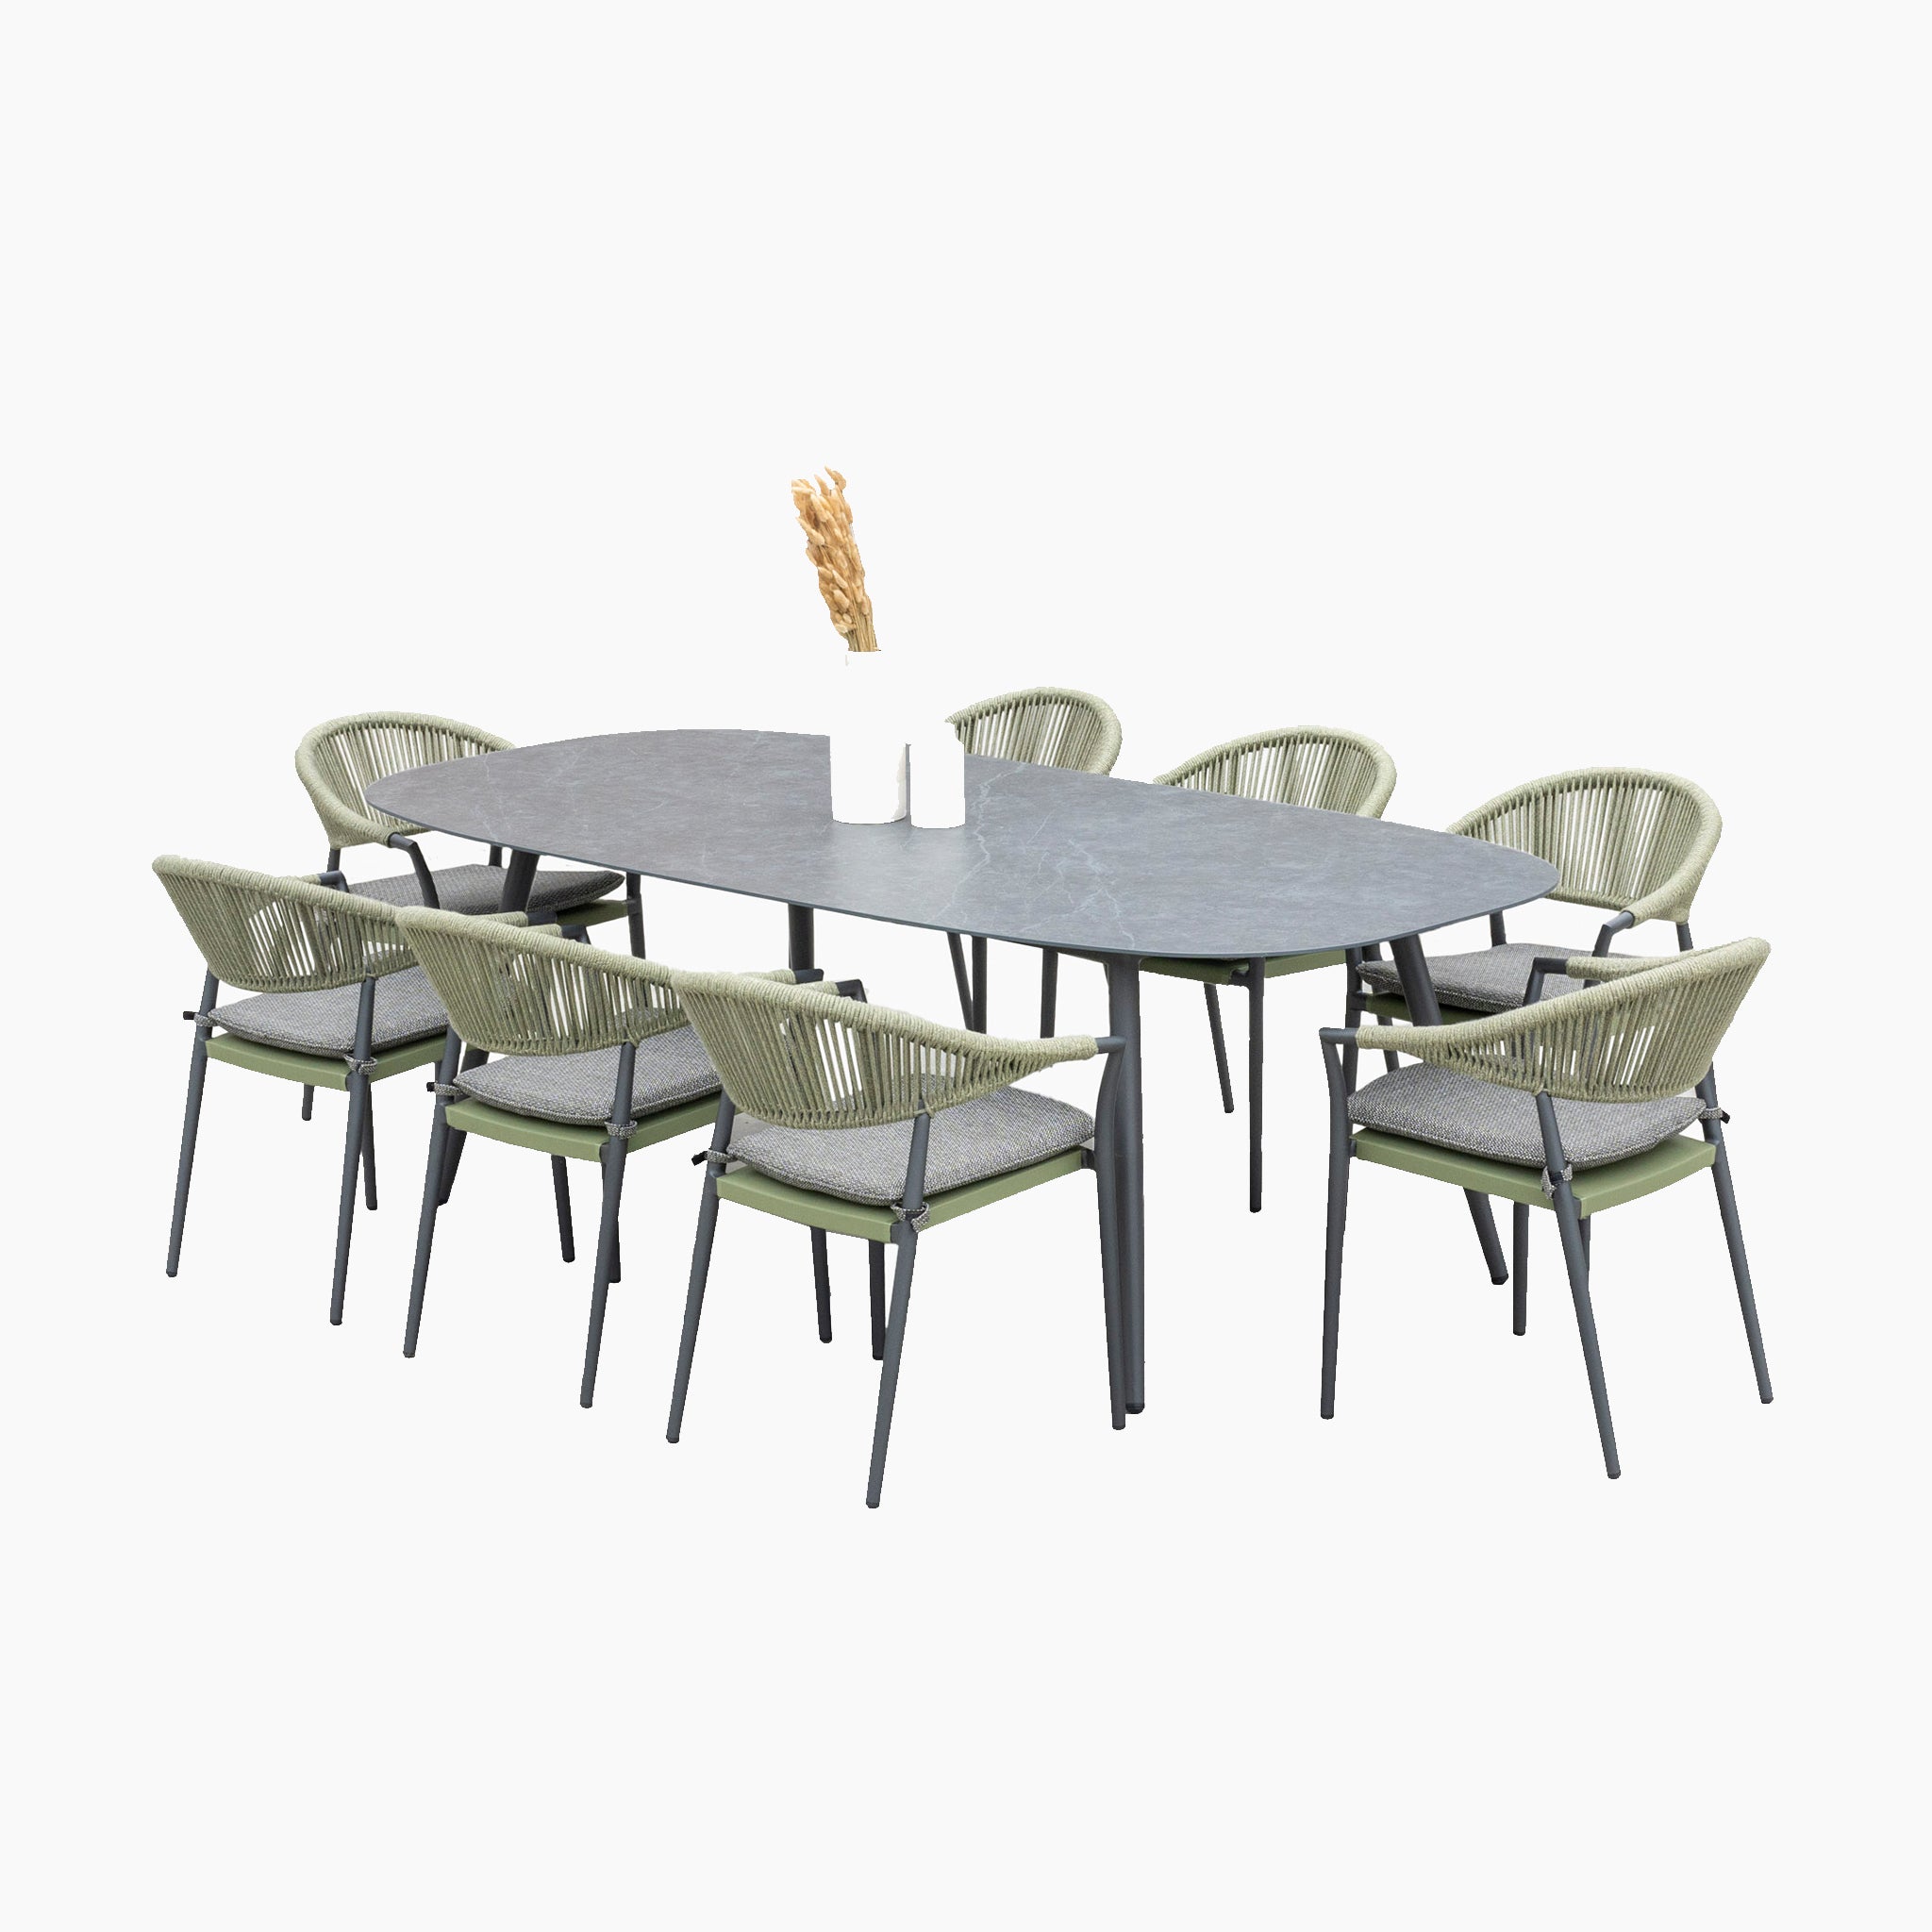 Cloverly 8 Seat Rope Oval Dining Set with Ceramic Table in Olive Green